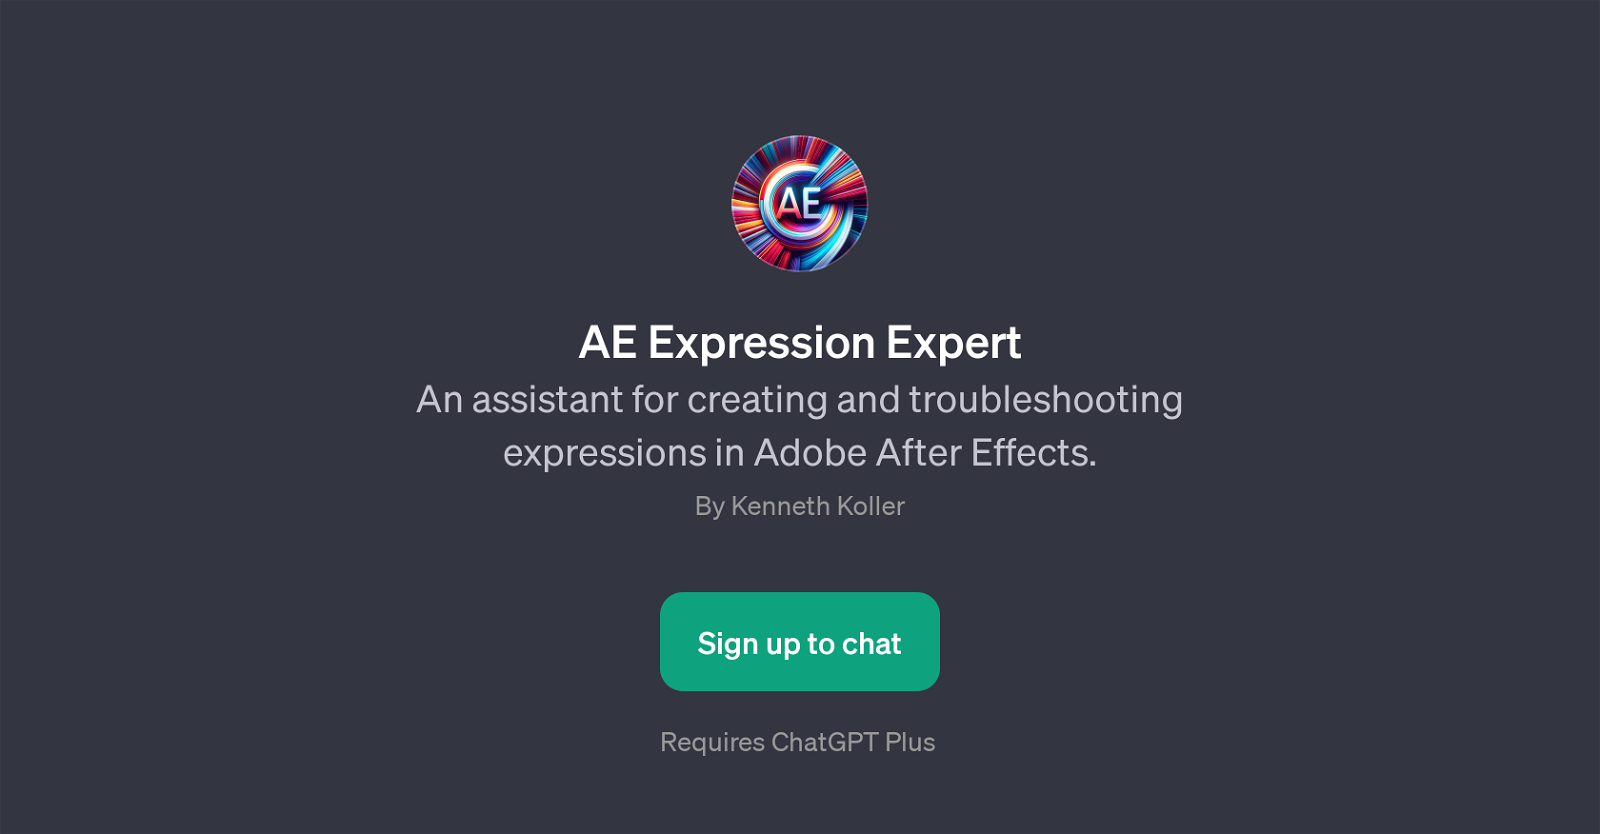 AE Expression Expert website